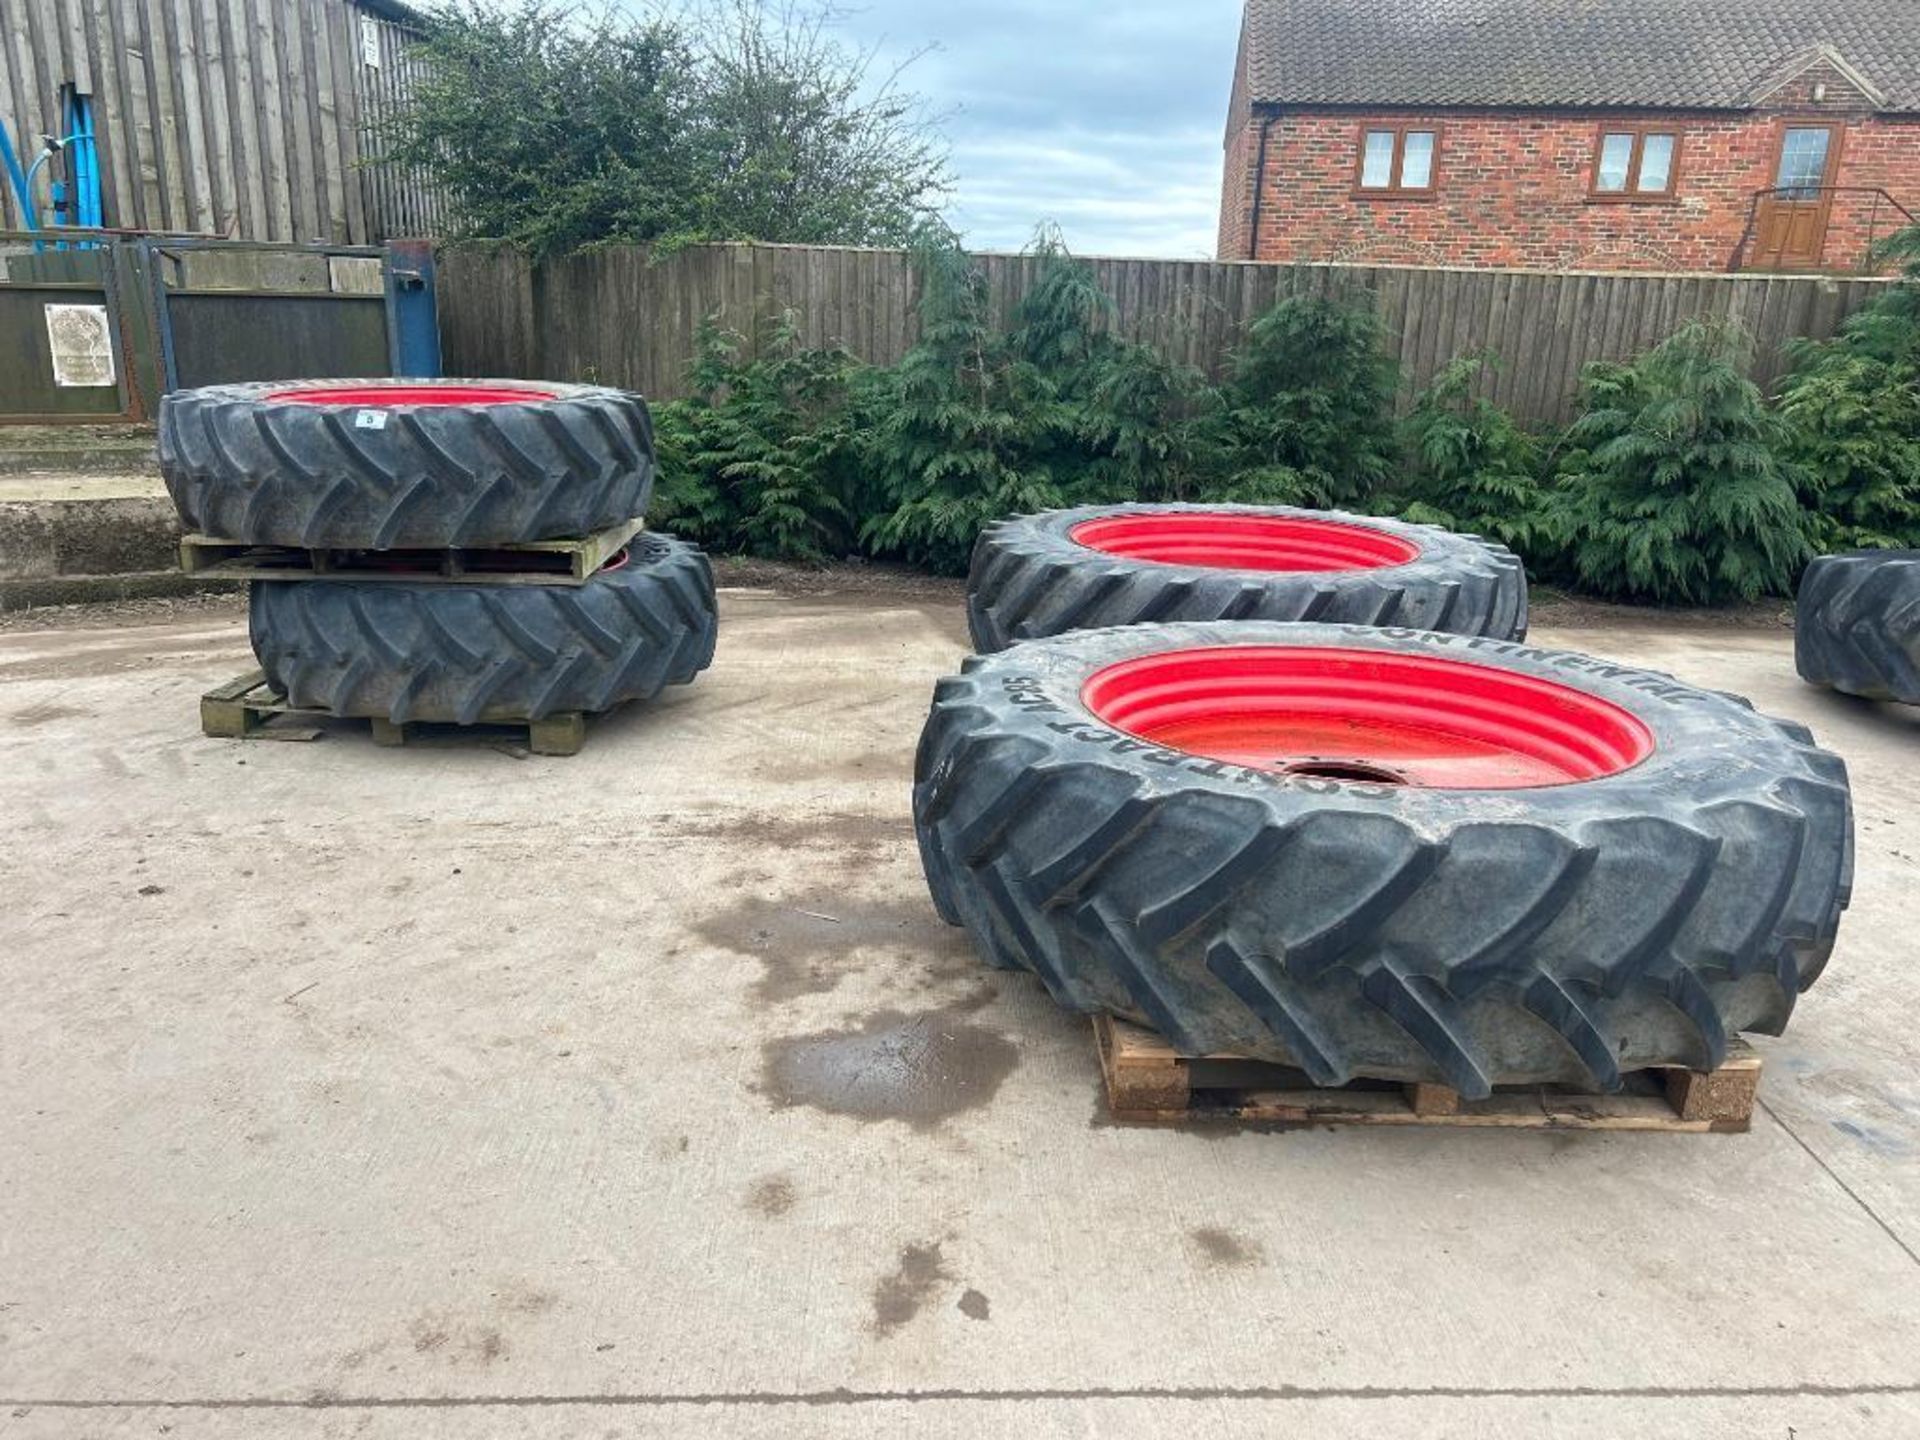 Set of 380/85R34 front and 18.4R46 rear wheels and tyres to fit Fendt 820 and 724.